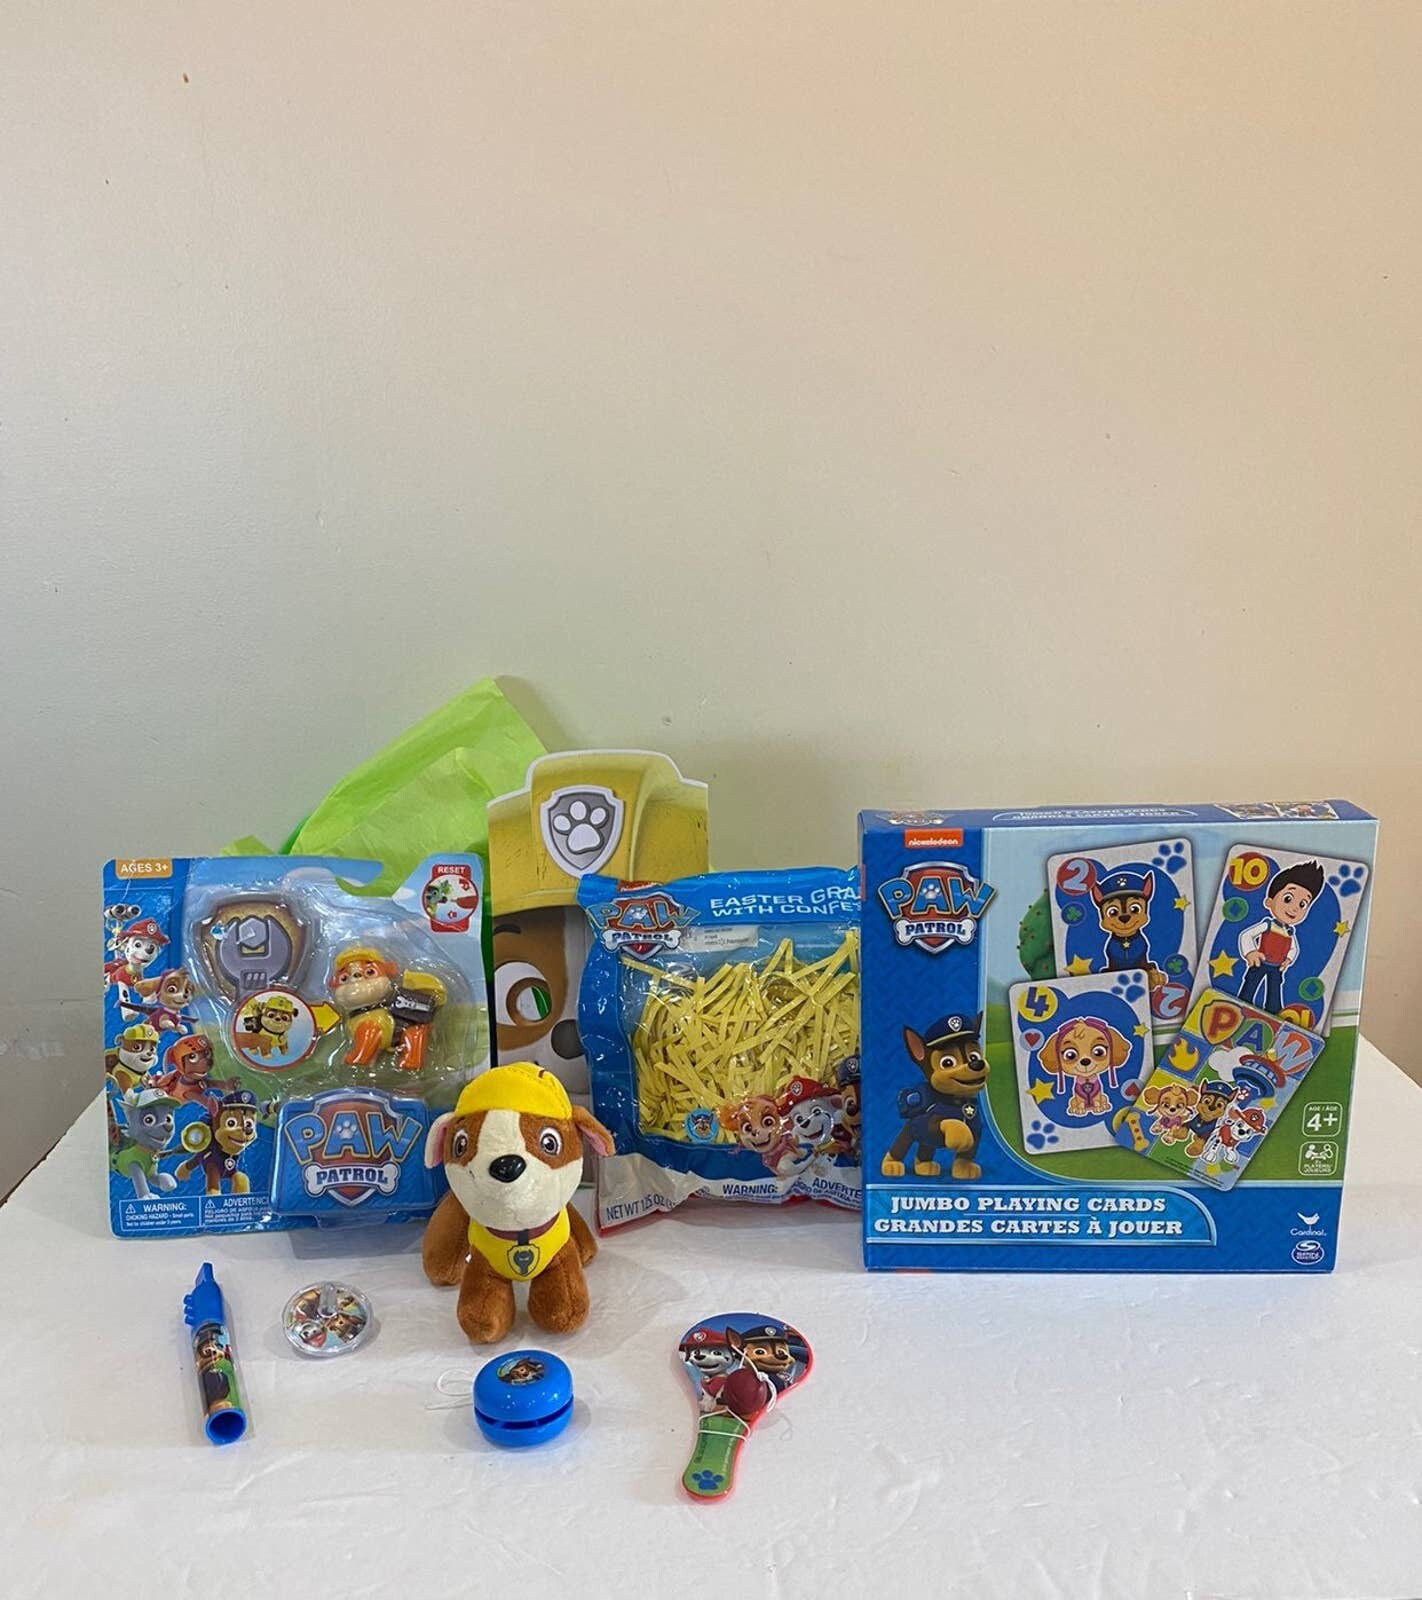  Paw Patrol Deluxe Figural Sea Rubble Figures : Toys & Games